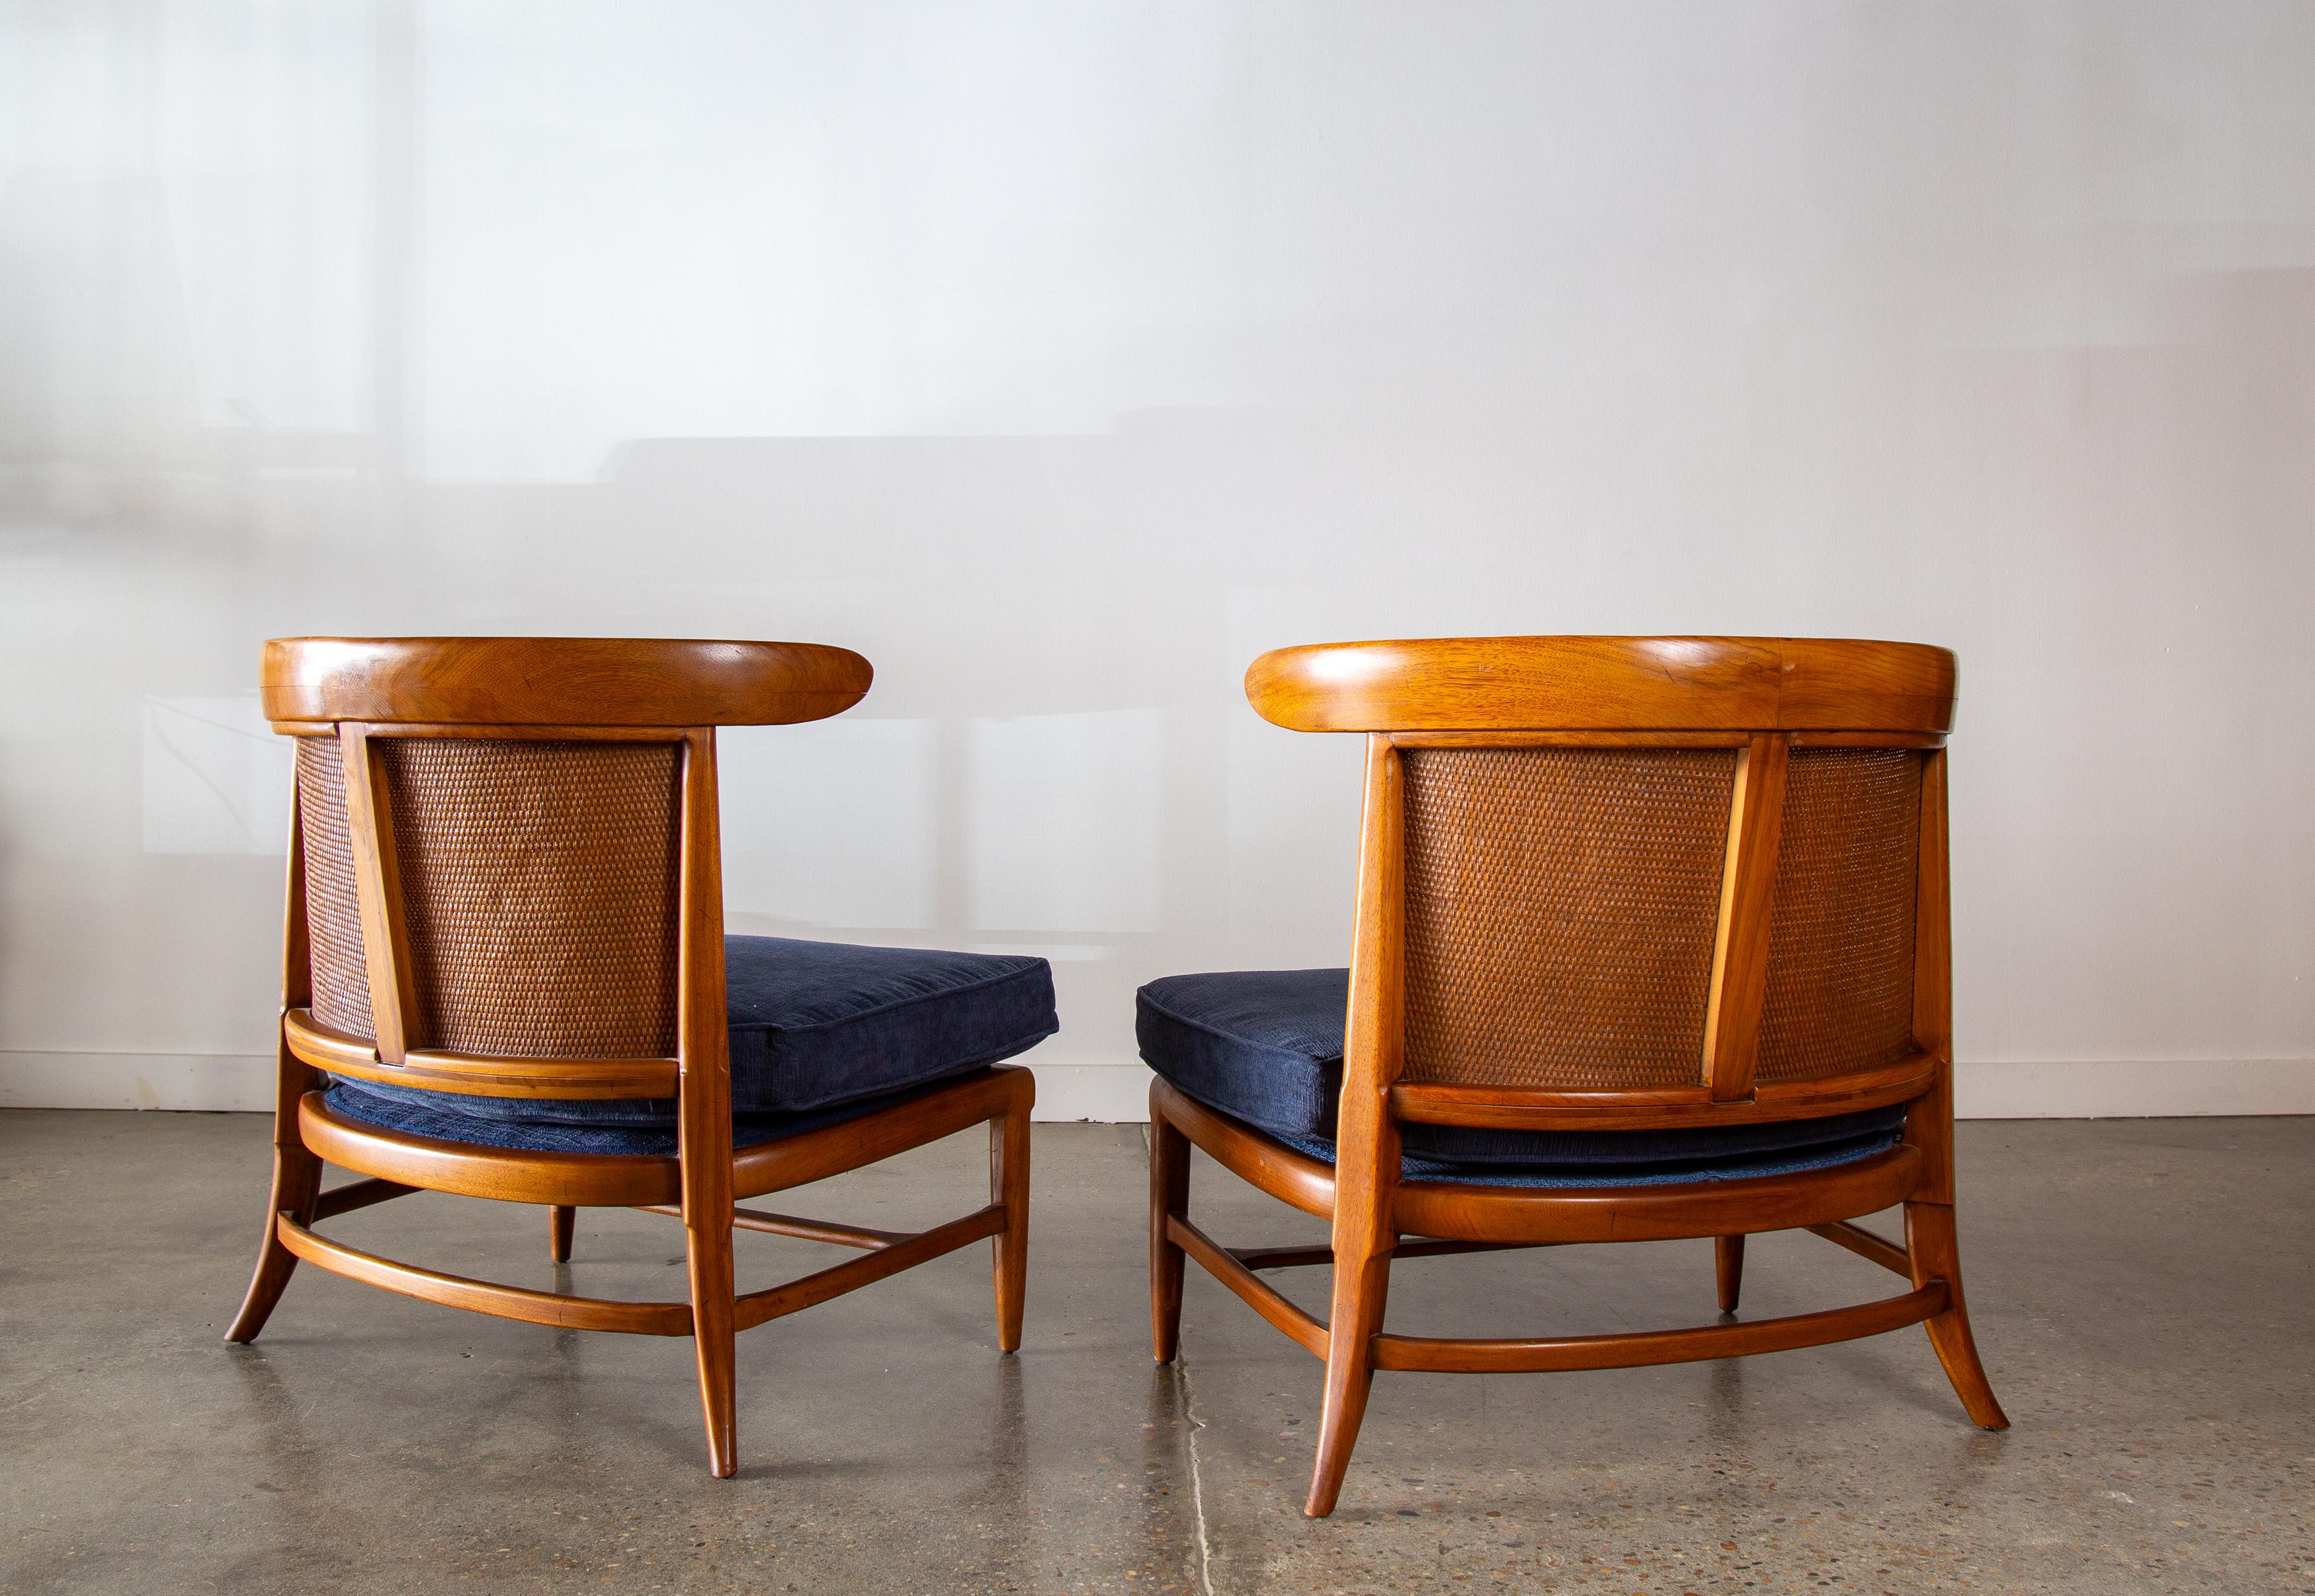 Pair of slipper chairs in chestnut and densely woven cane backs designed by John Lubberts and Lambert Mulder for Tomlinson Furniture Company.  These are a part of the sophisticate line and have an elegant form with curved saber form legs. The cane